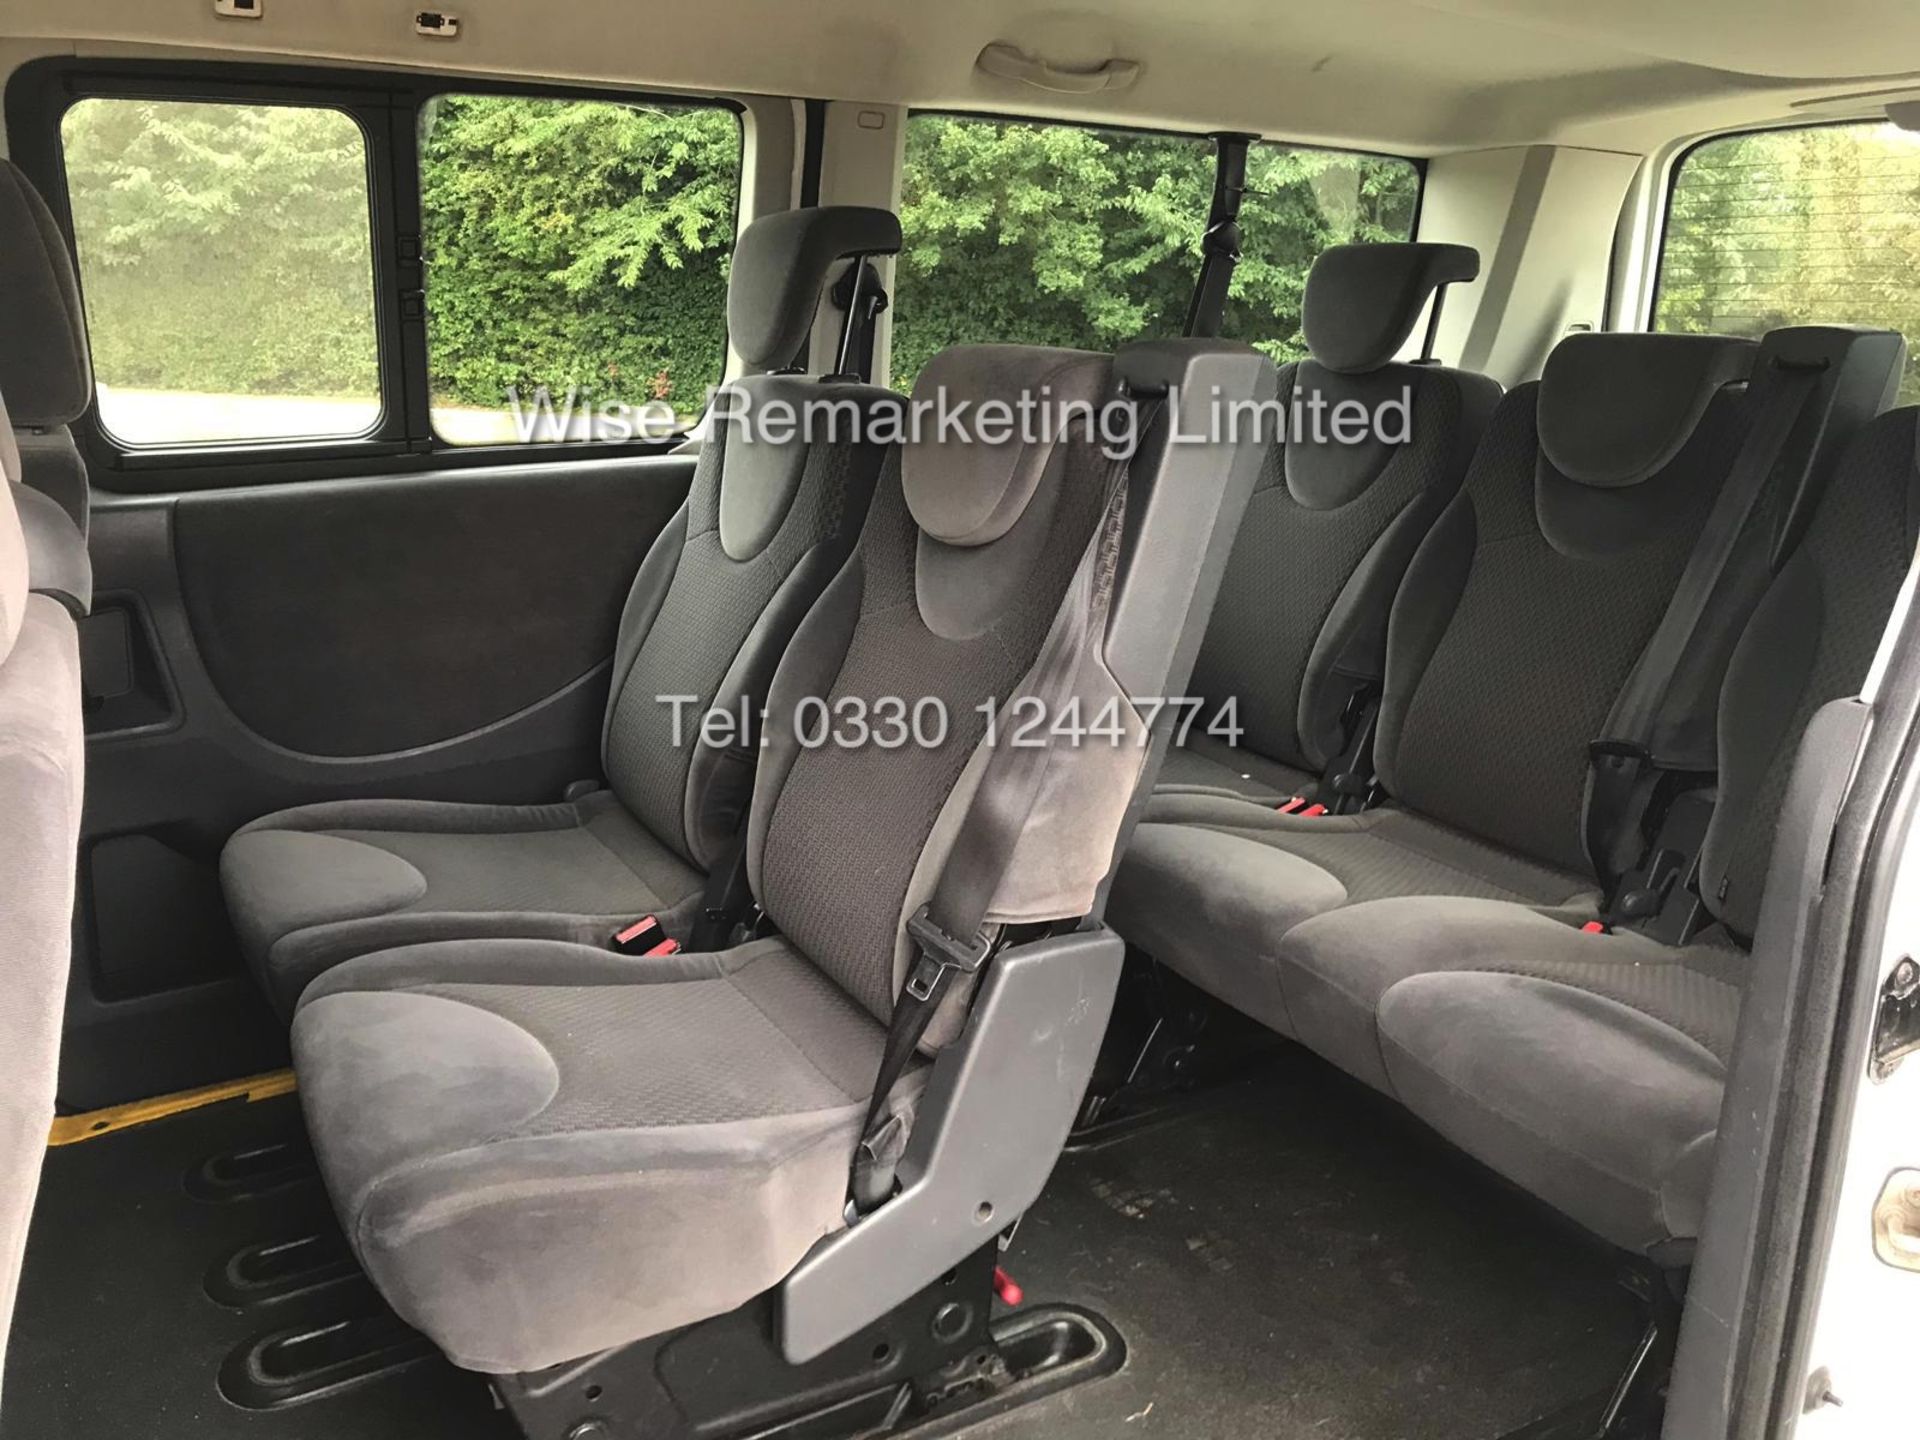 PEUGEOT EUROBUS S *MPV 8 SEATER* 2.0l (2013 - 13 REG) **AIR CON** - 1 OWNER FROM NEW - Image 14 of 19